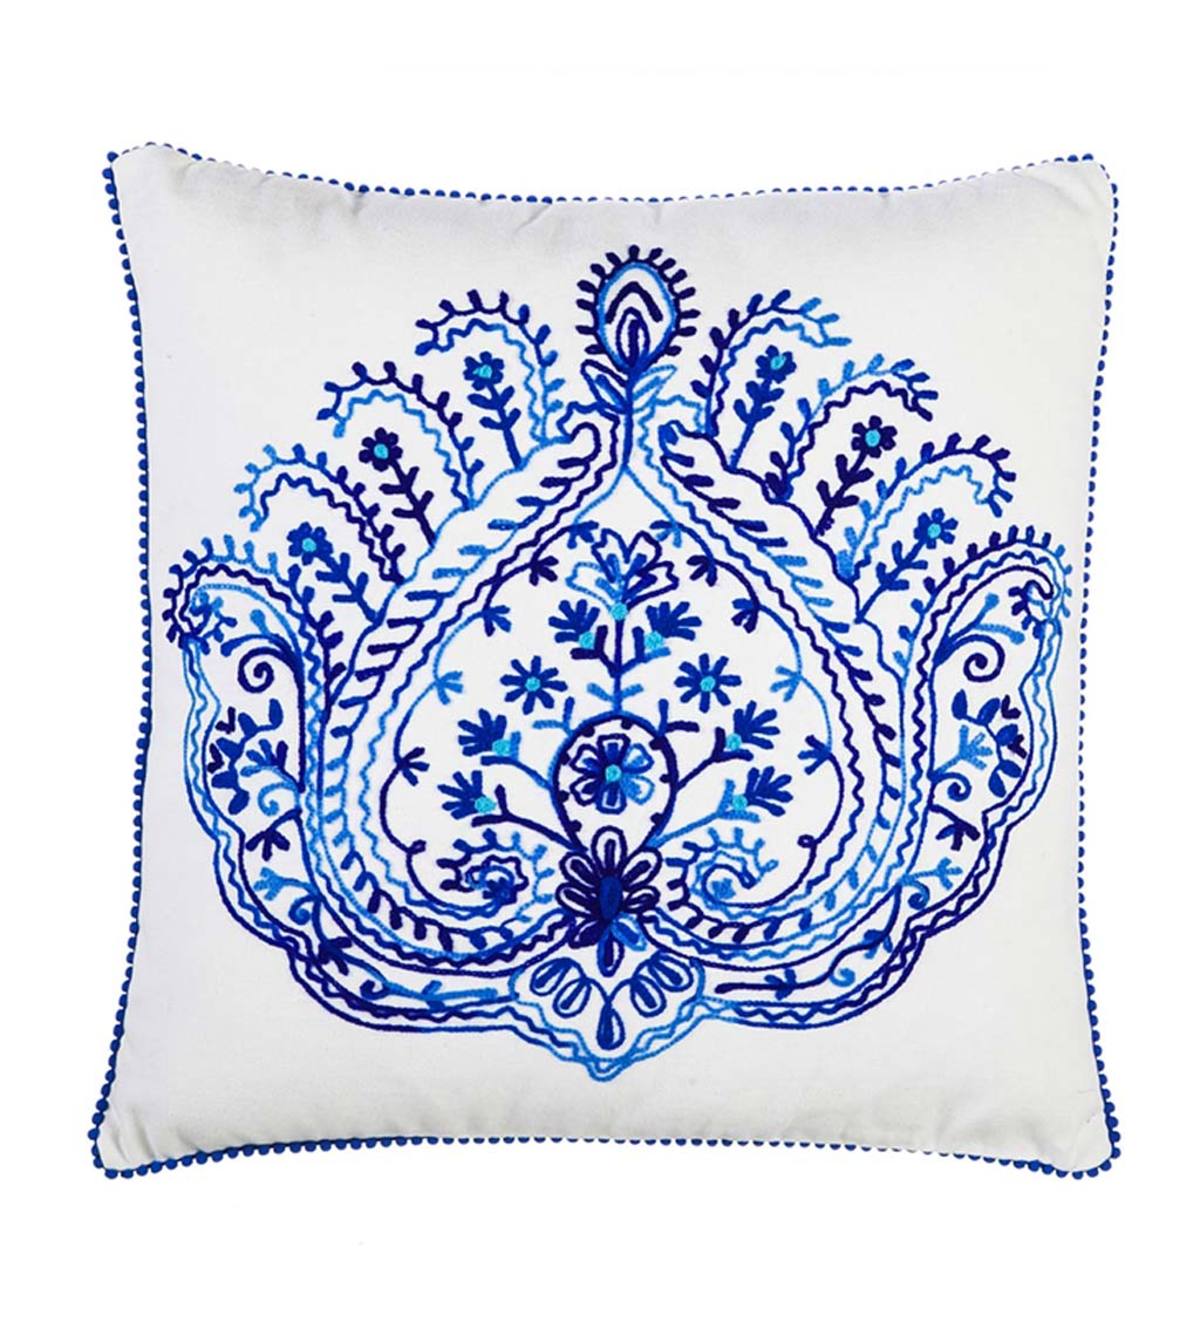 Blissful Blue Patterned Embroidered Pillow | Plow & Hearth